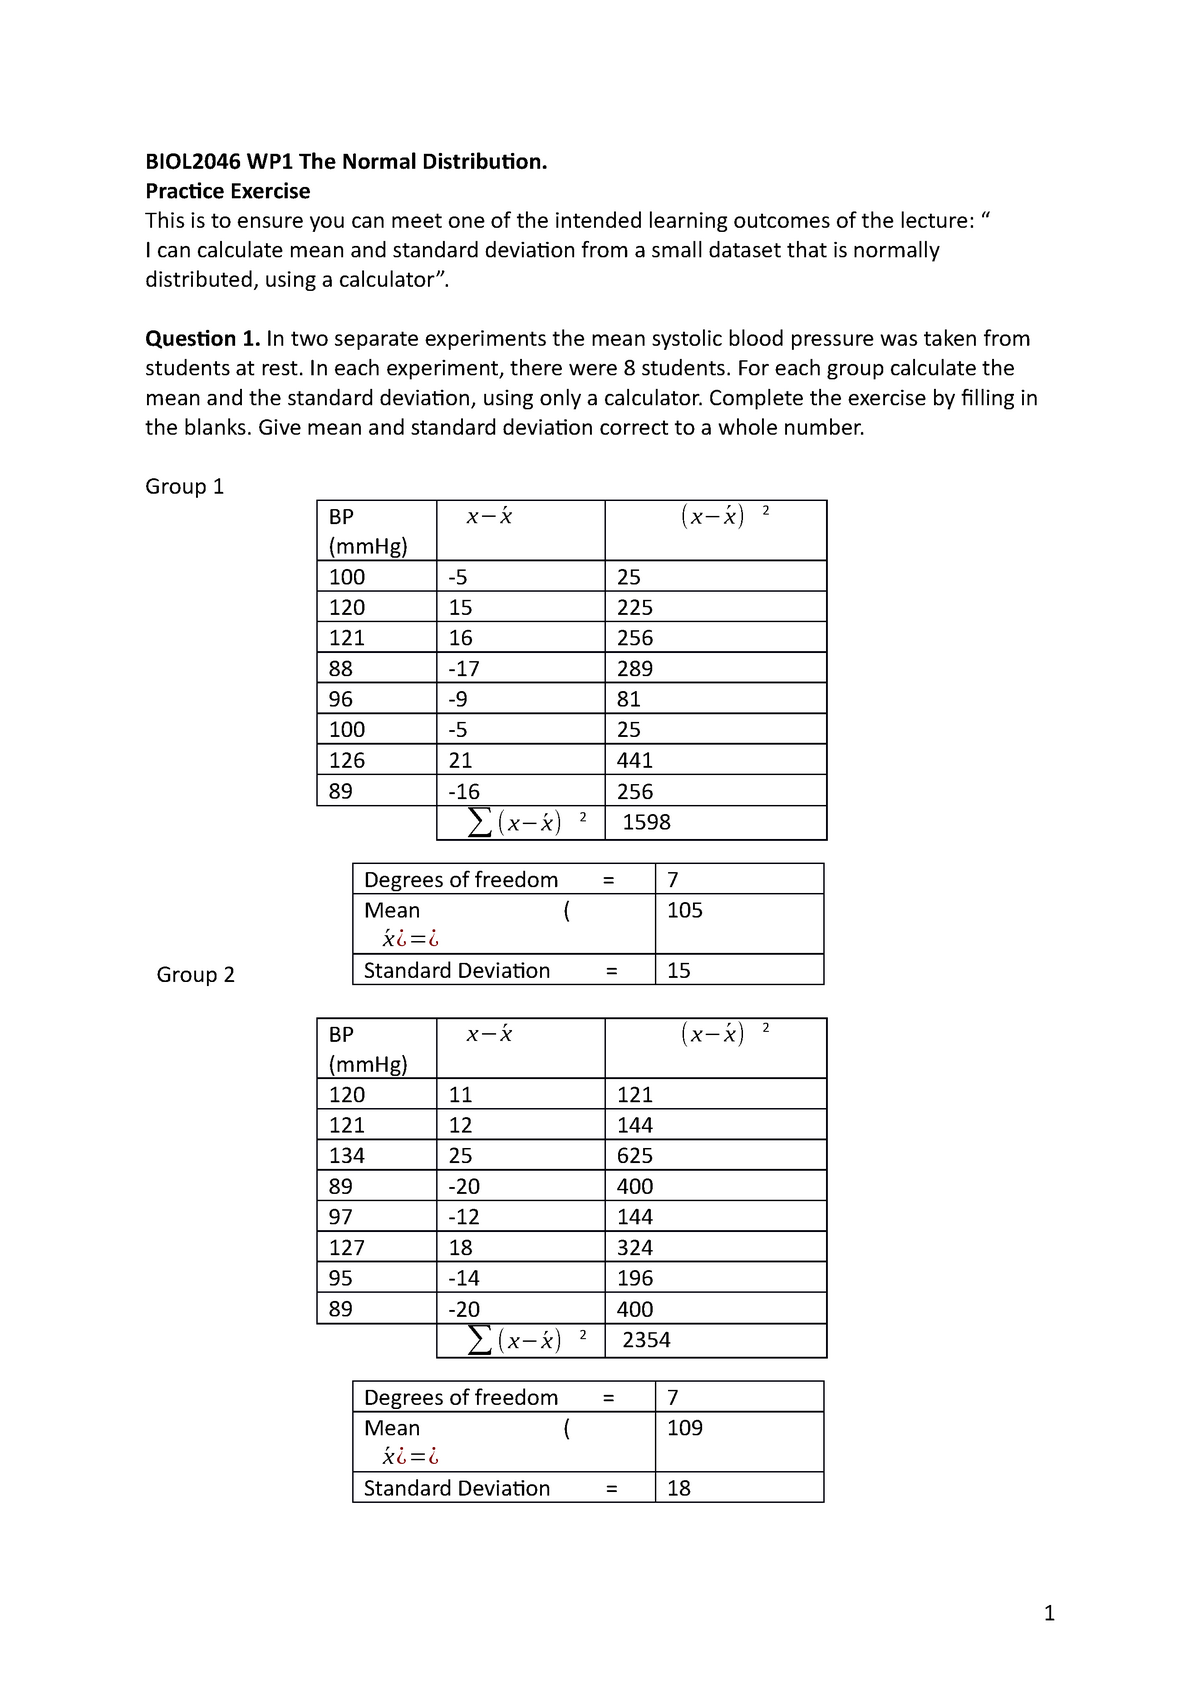 wp1-5a-work-package-biol2046-wp1-the-normal-distribution-practice